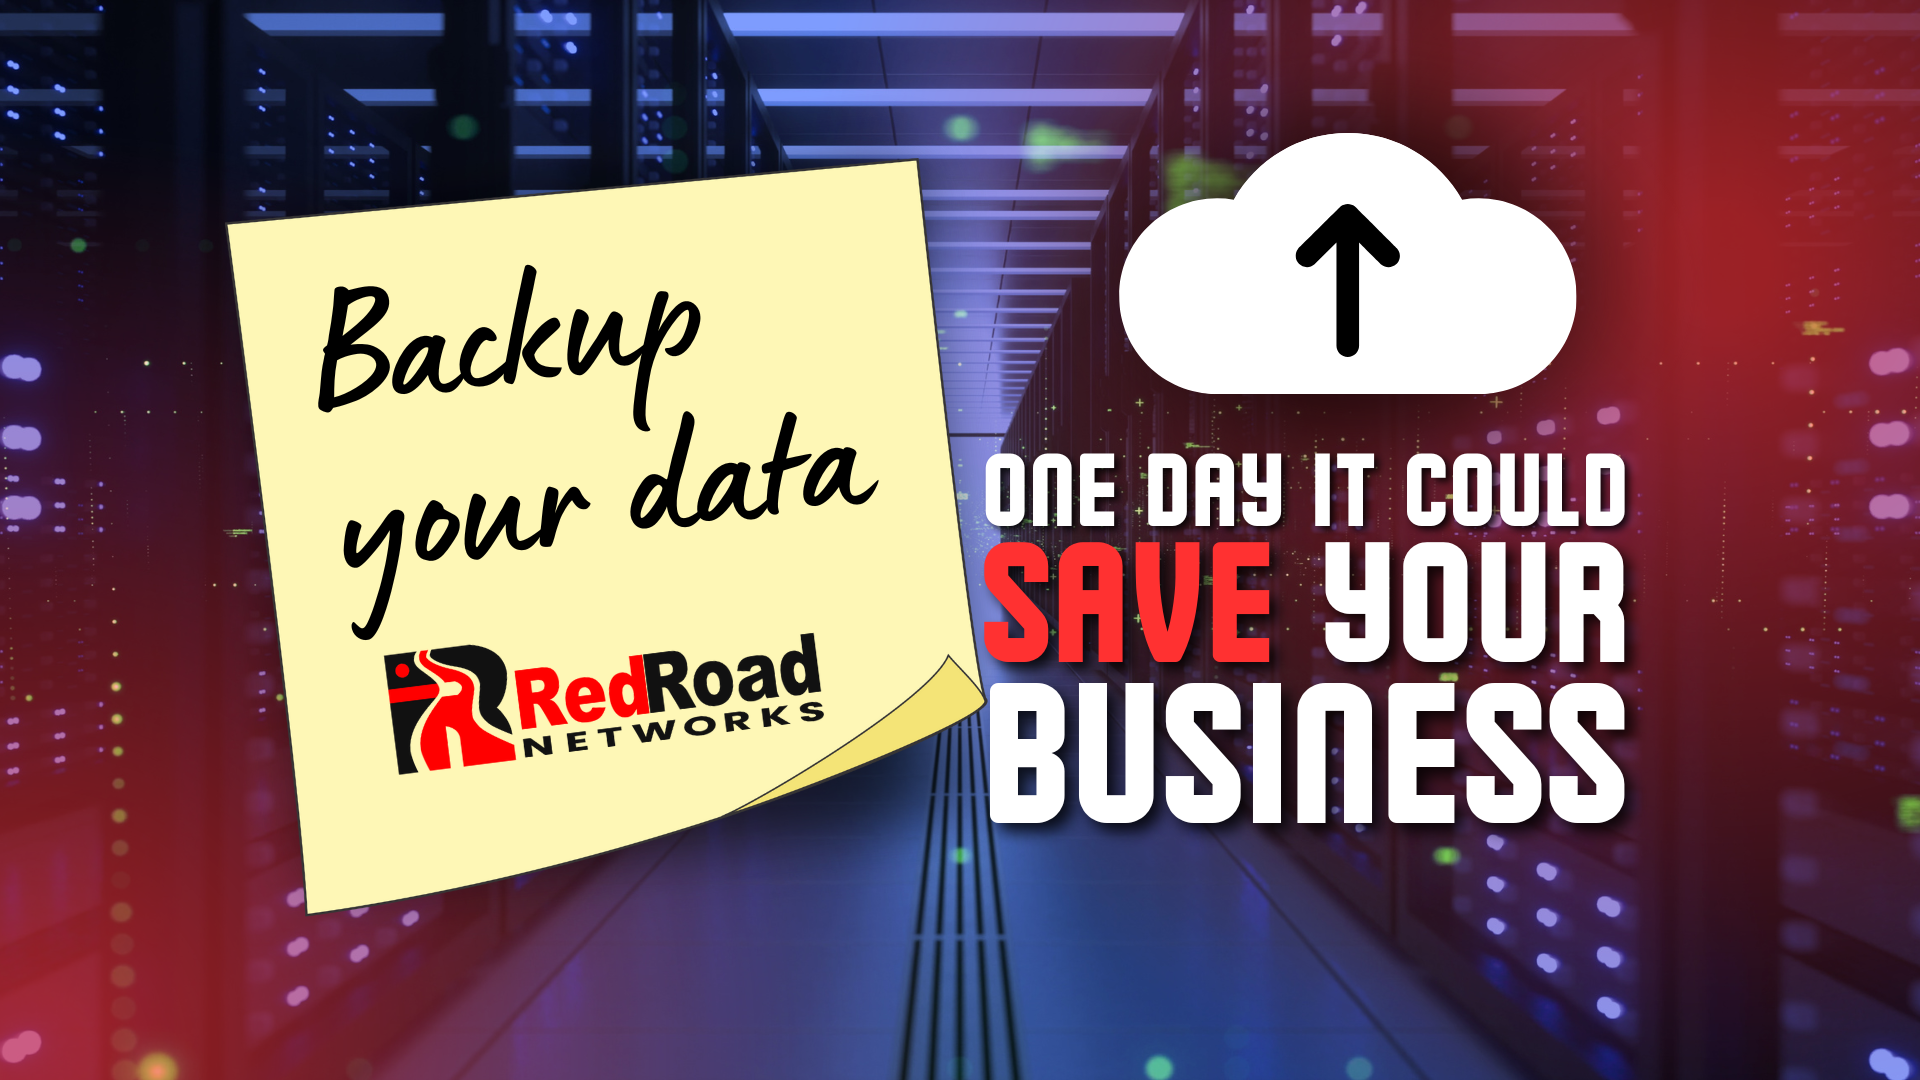 Back Up Your Data. It Could Save Your Business.